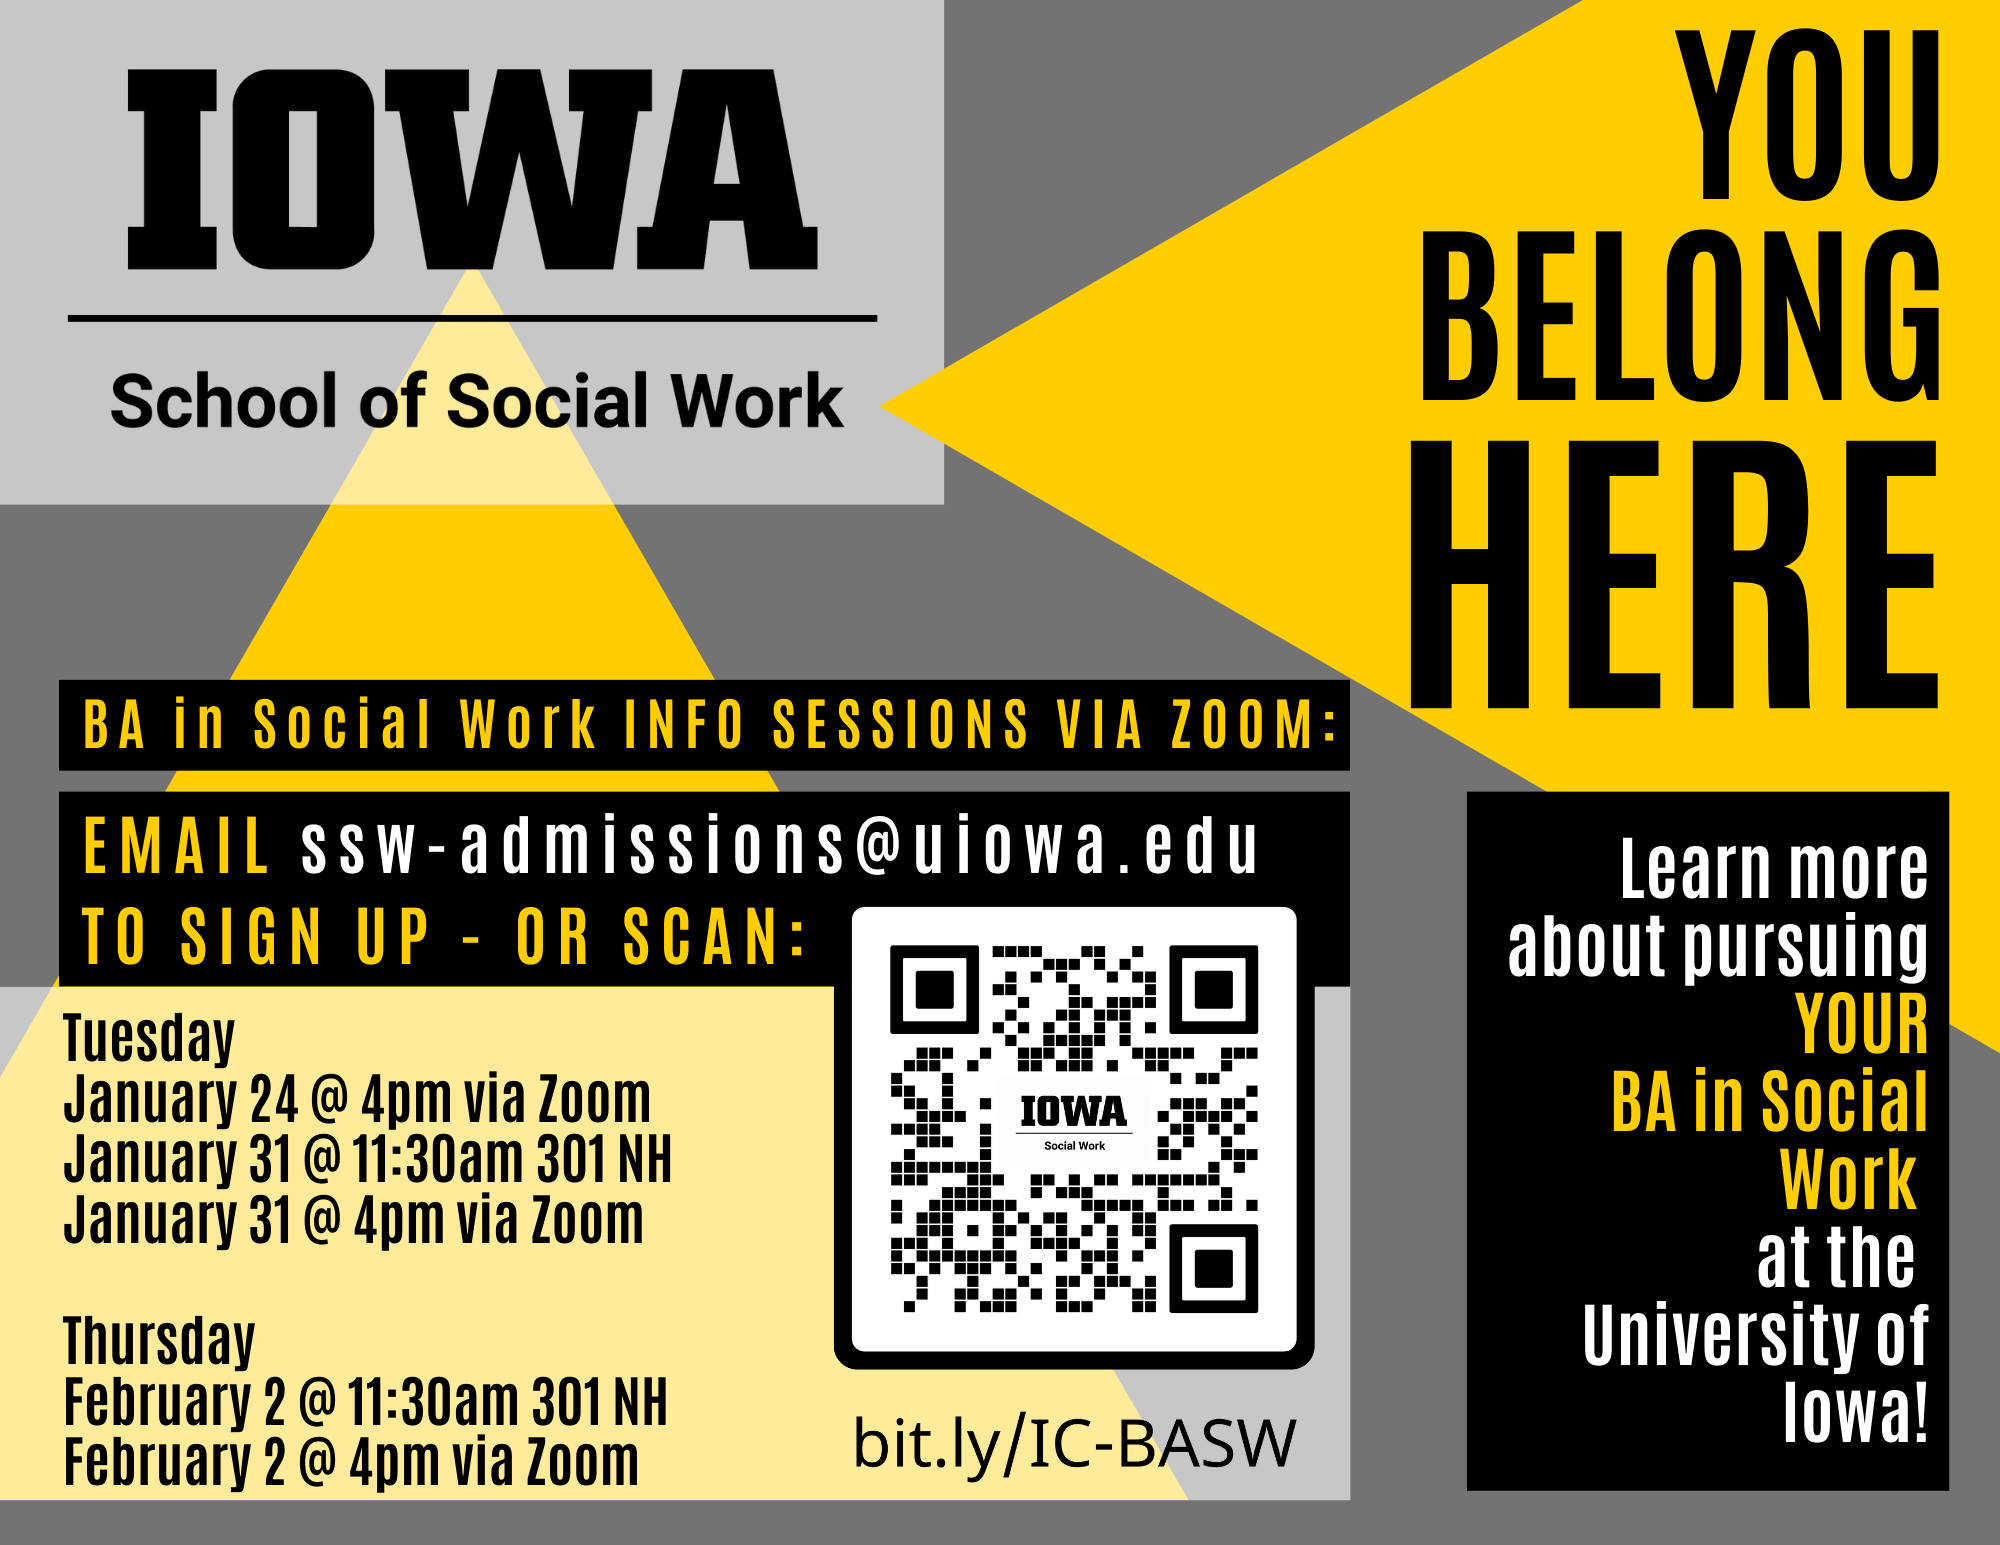 BA in Social Work Info Sessions